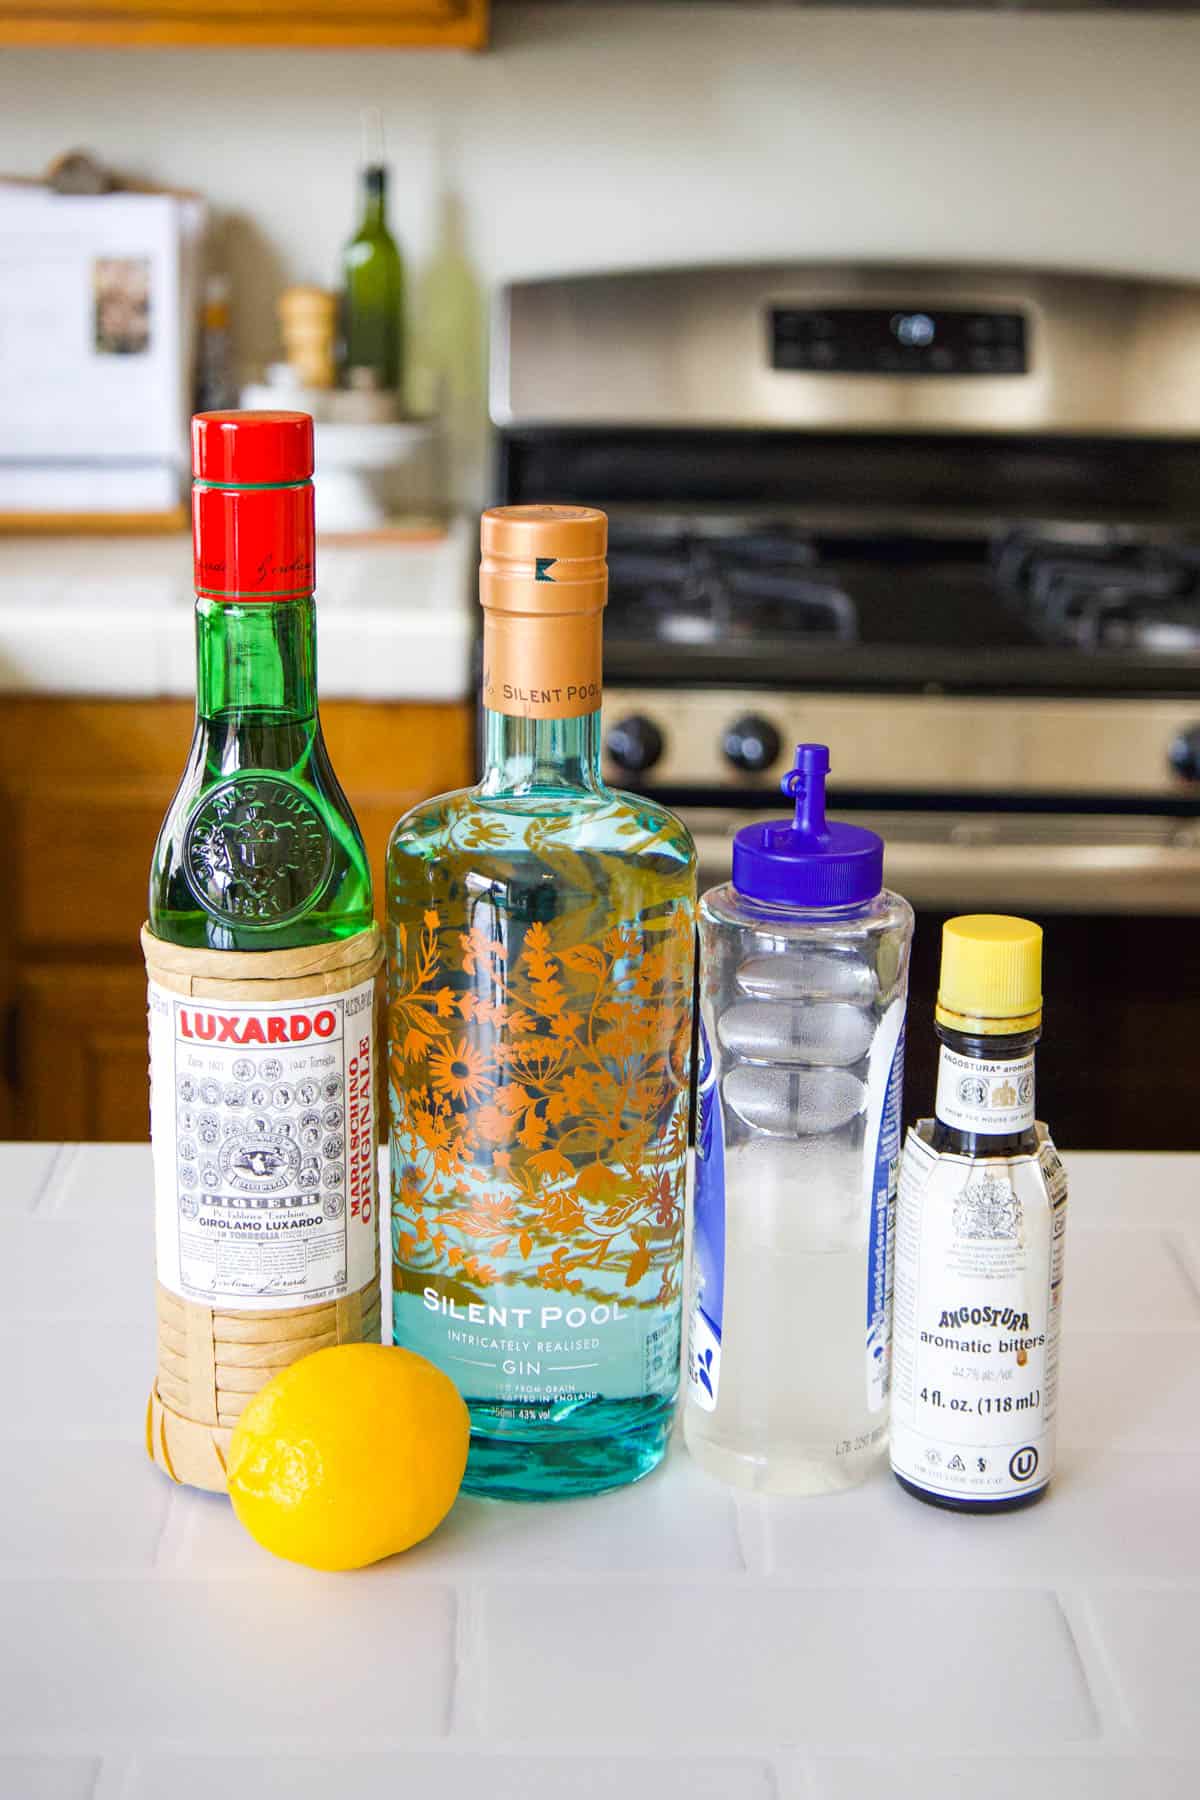 Casino cocktail ingredients on the kitchen countertop.